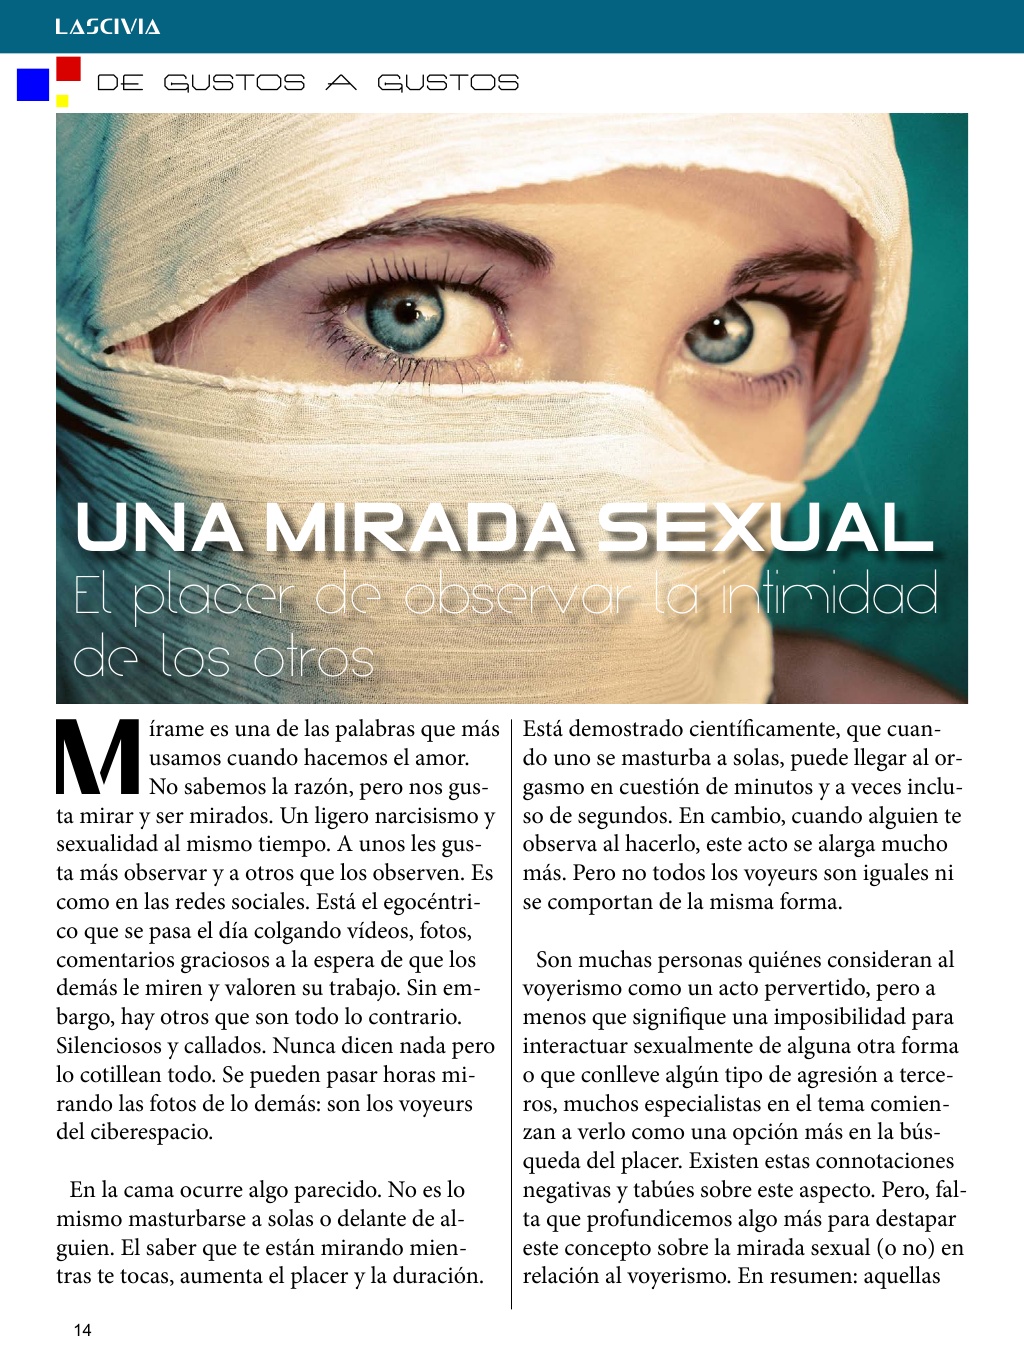 The Collection Of magazines - Lascivia (ESP) - Is Presented Sex-Forum